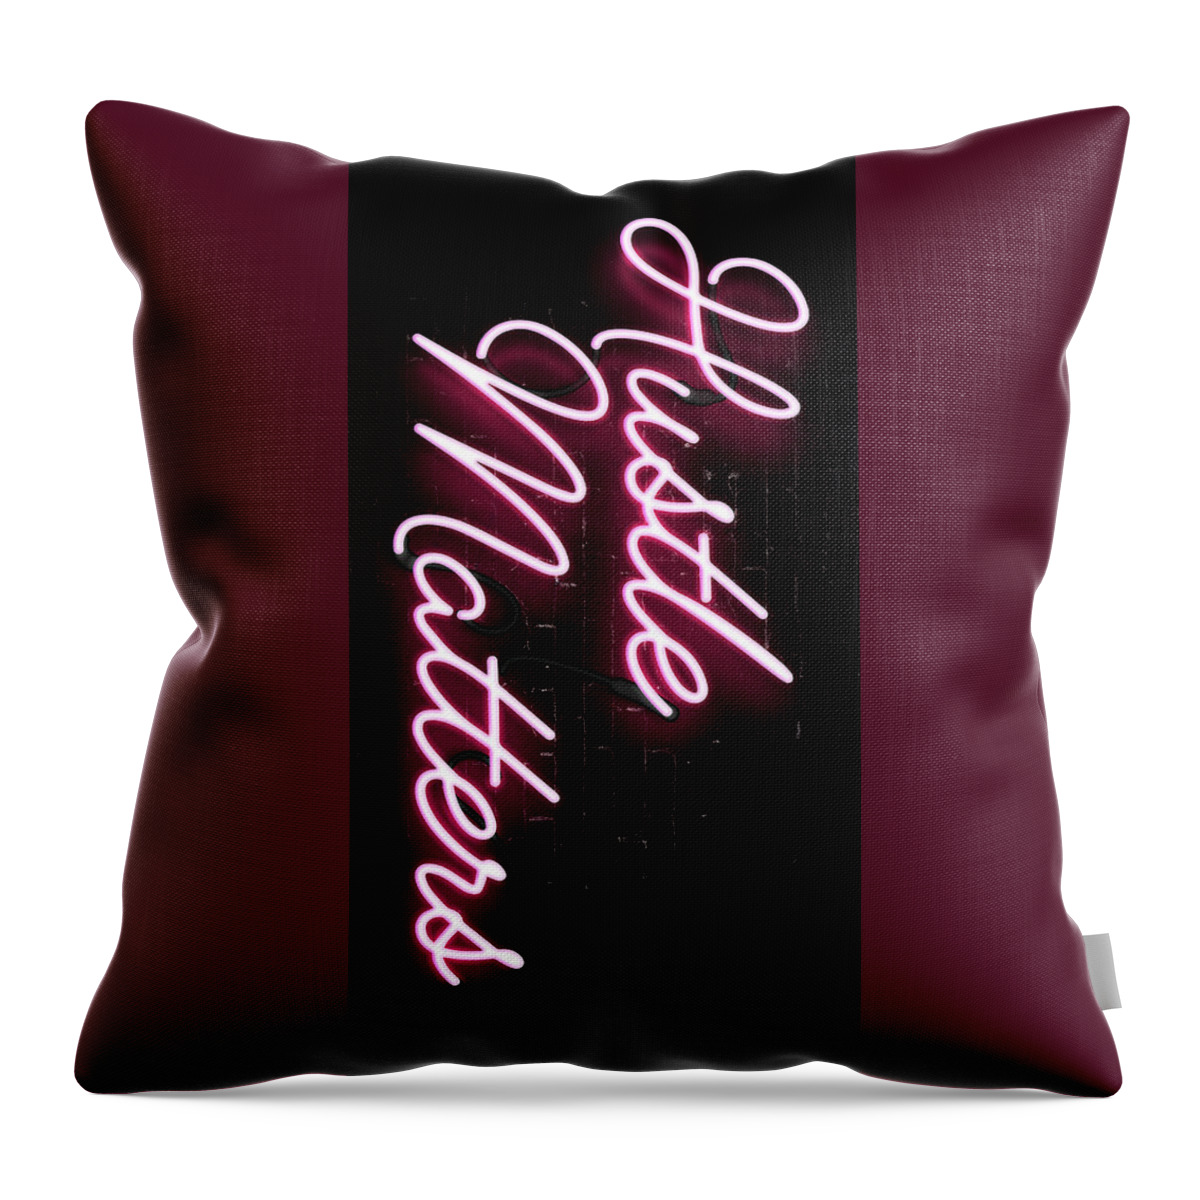 Hustle Throw Pillow featuring the digital art Hustle Matters by Canvas Cultures